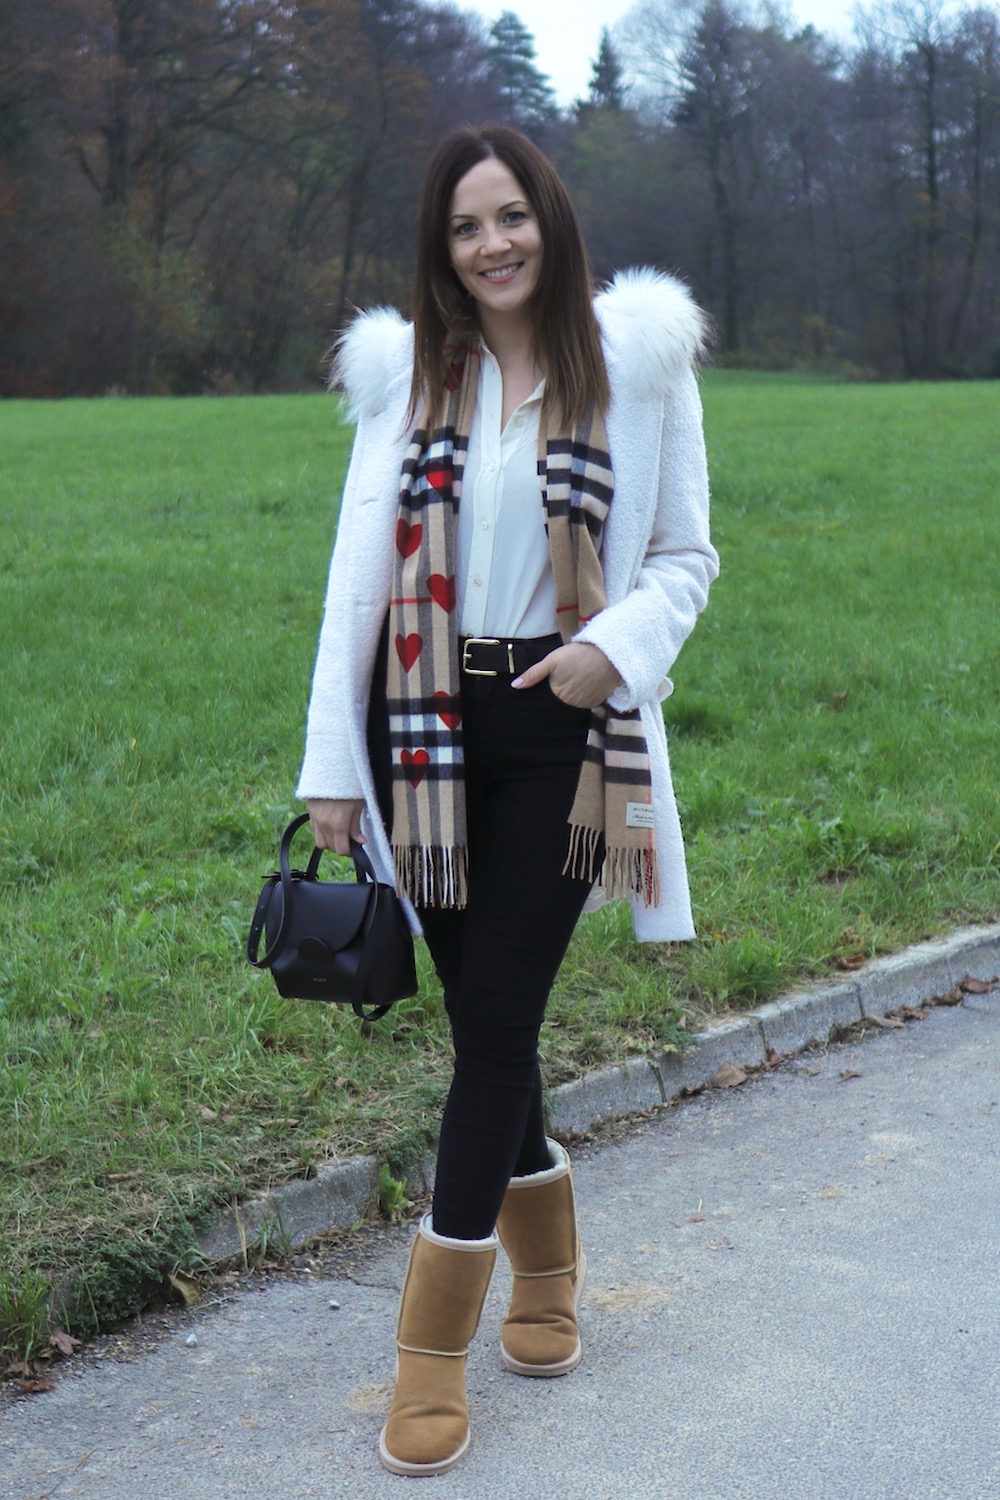 https://kimbedene.com/wp-content/uploads/2022/11/What-I-wore-tan-ugg-boots-uggs-outfit-ideas-PHOTO-3.jpeg